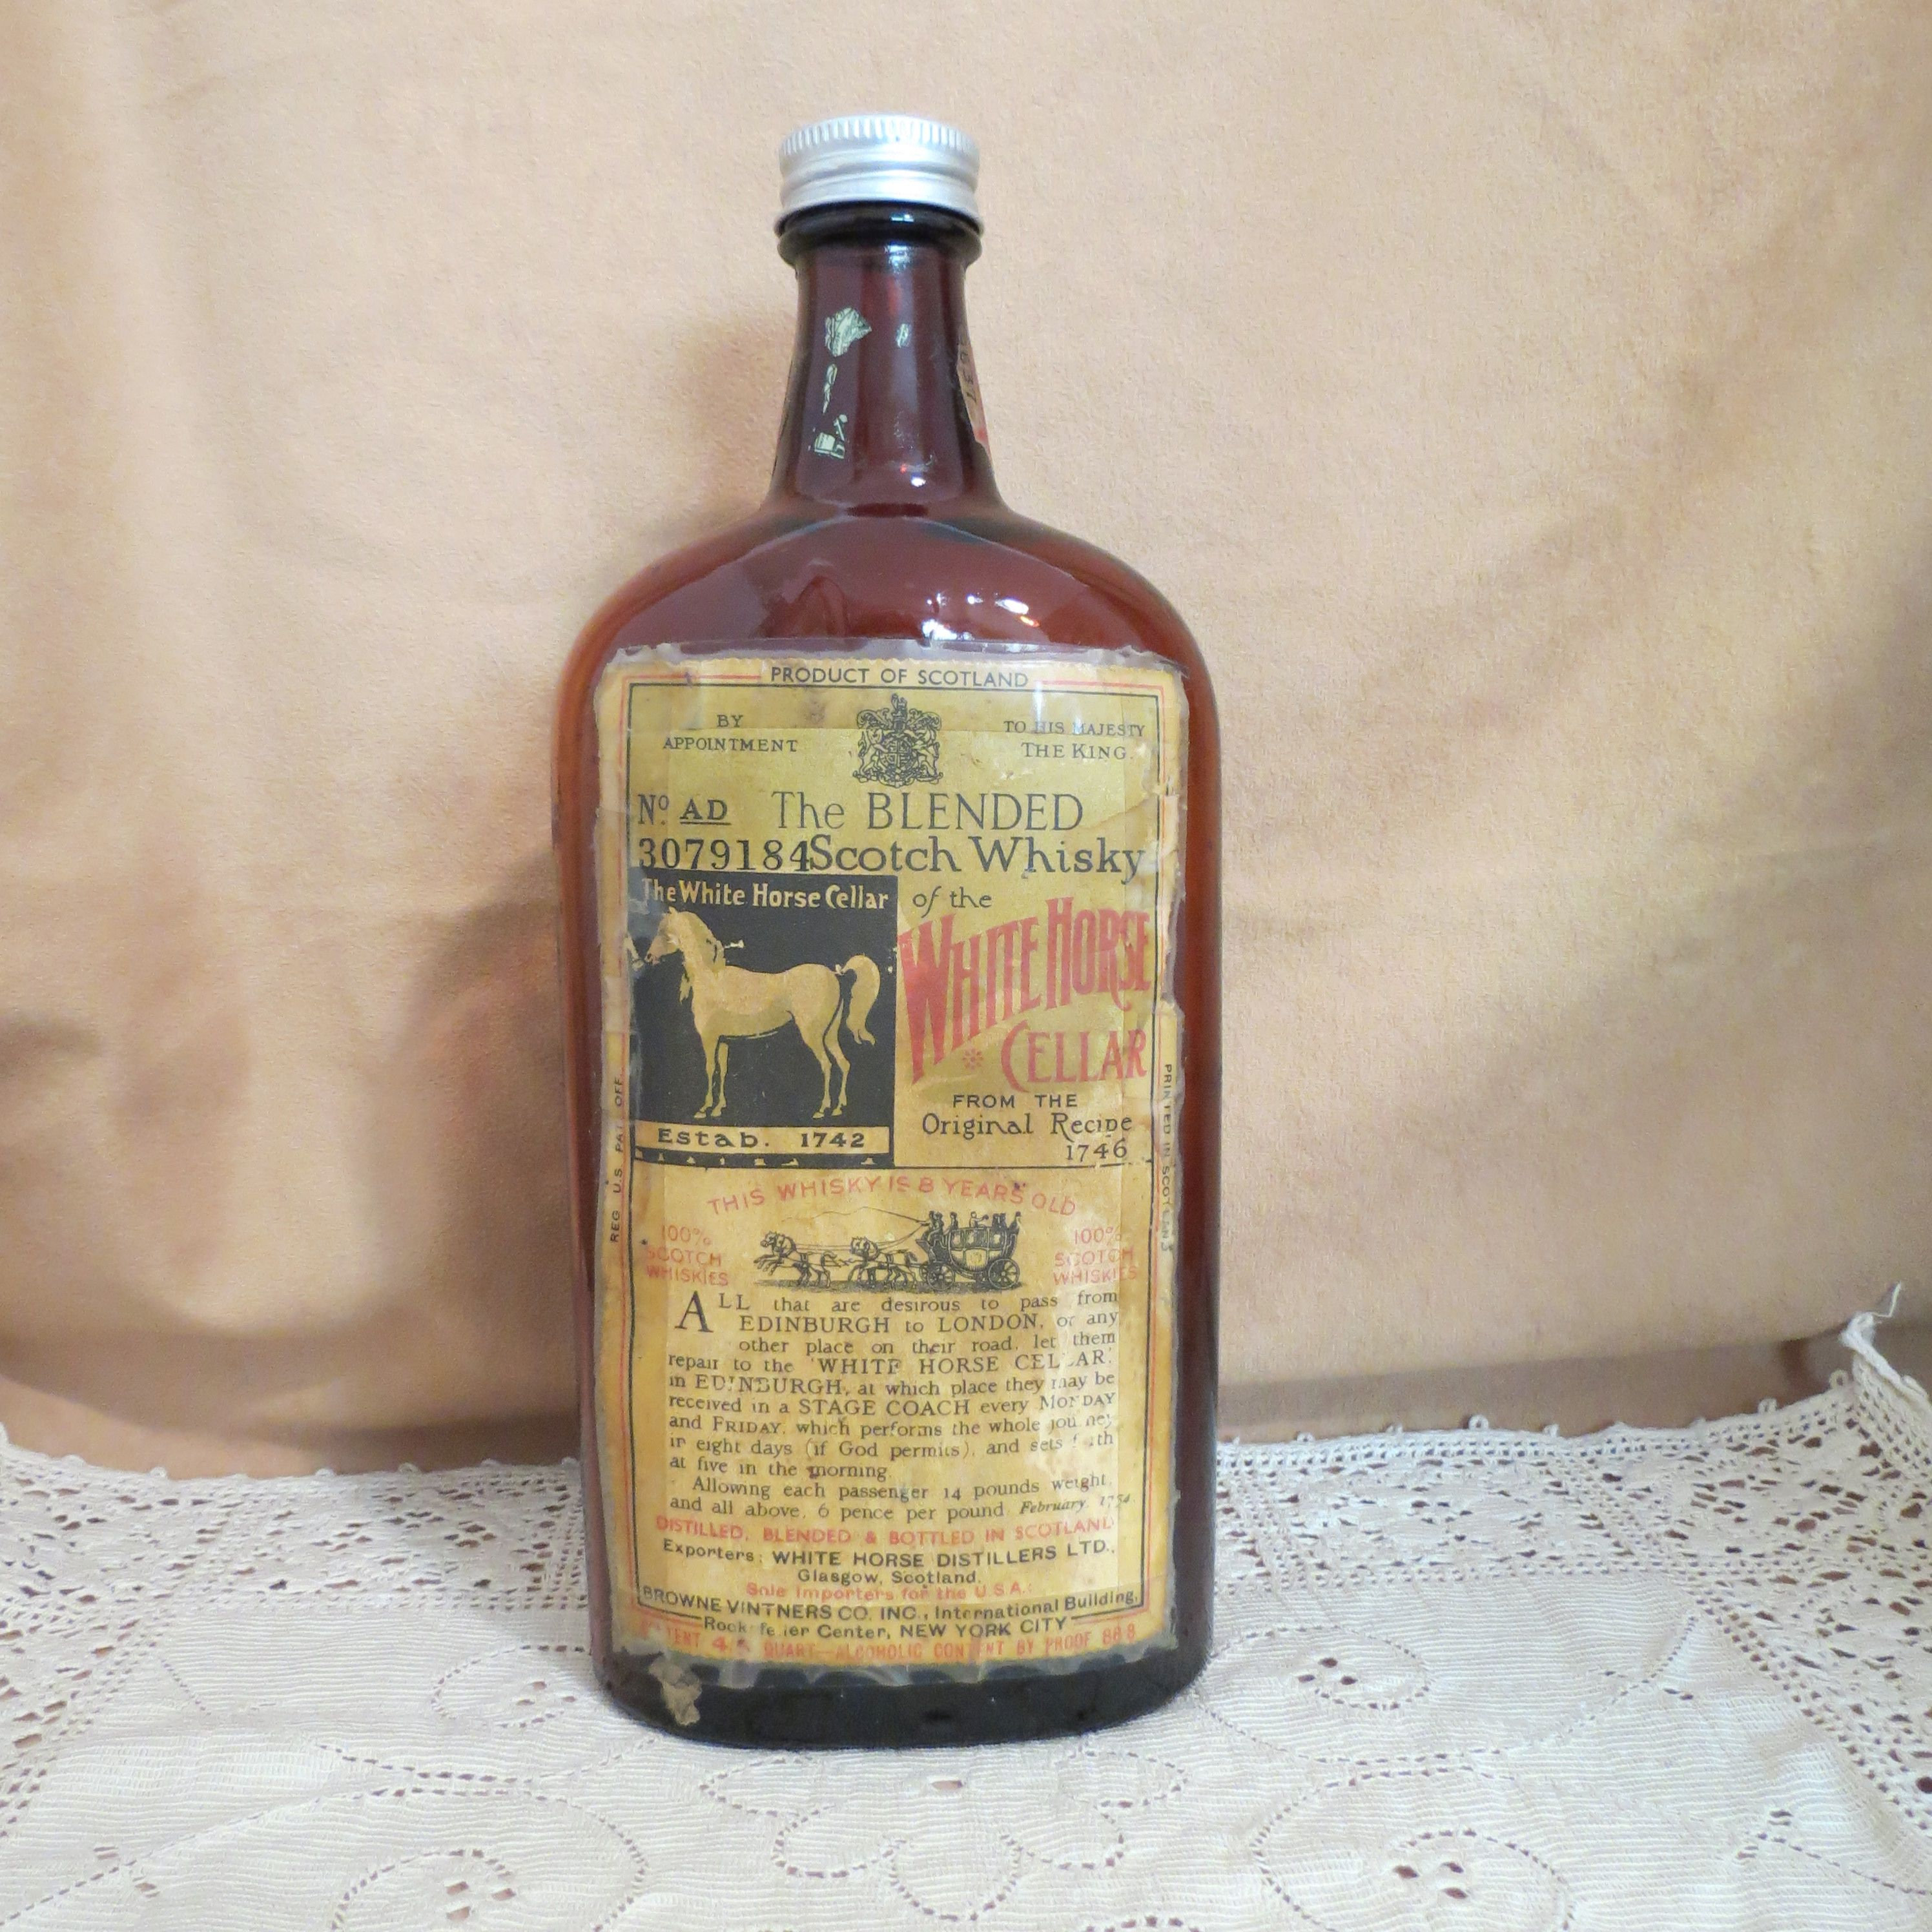 Vintage White Horse Cellar Scotch Whiskey Crate Auction